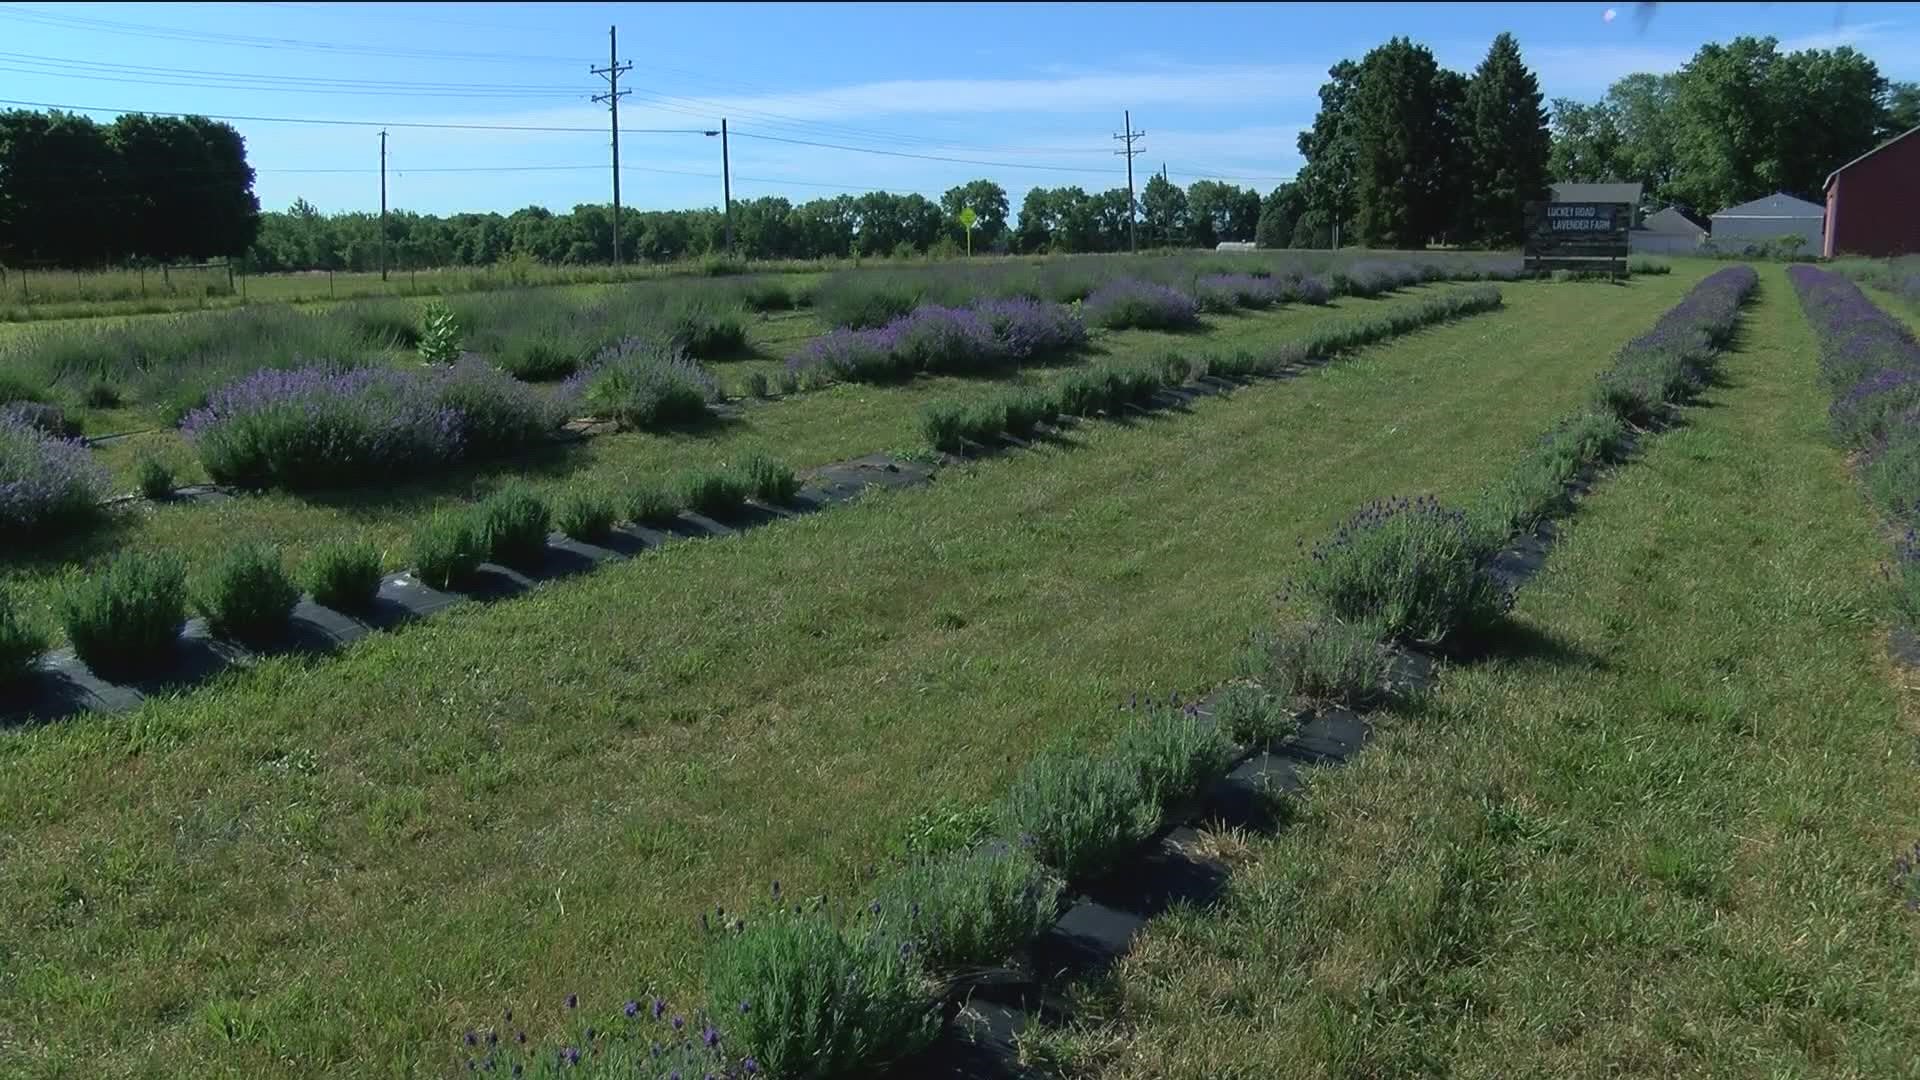 Luckey Road Lavender Farm got up and running in 2020 and welcomes visitors to pick their own lavender through July.